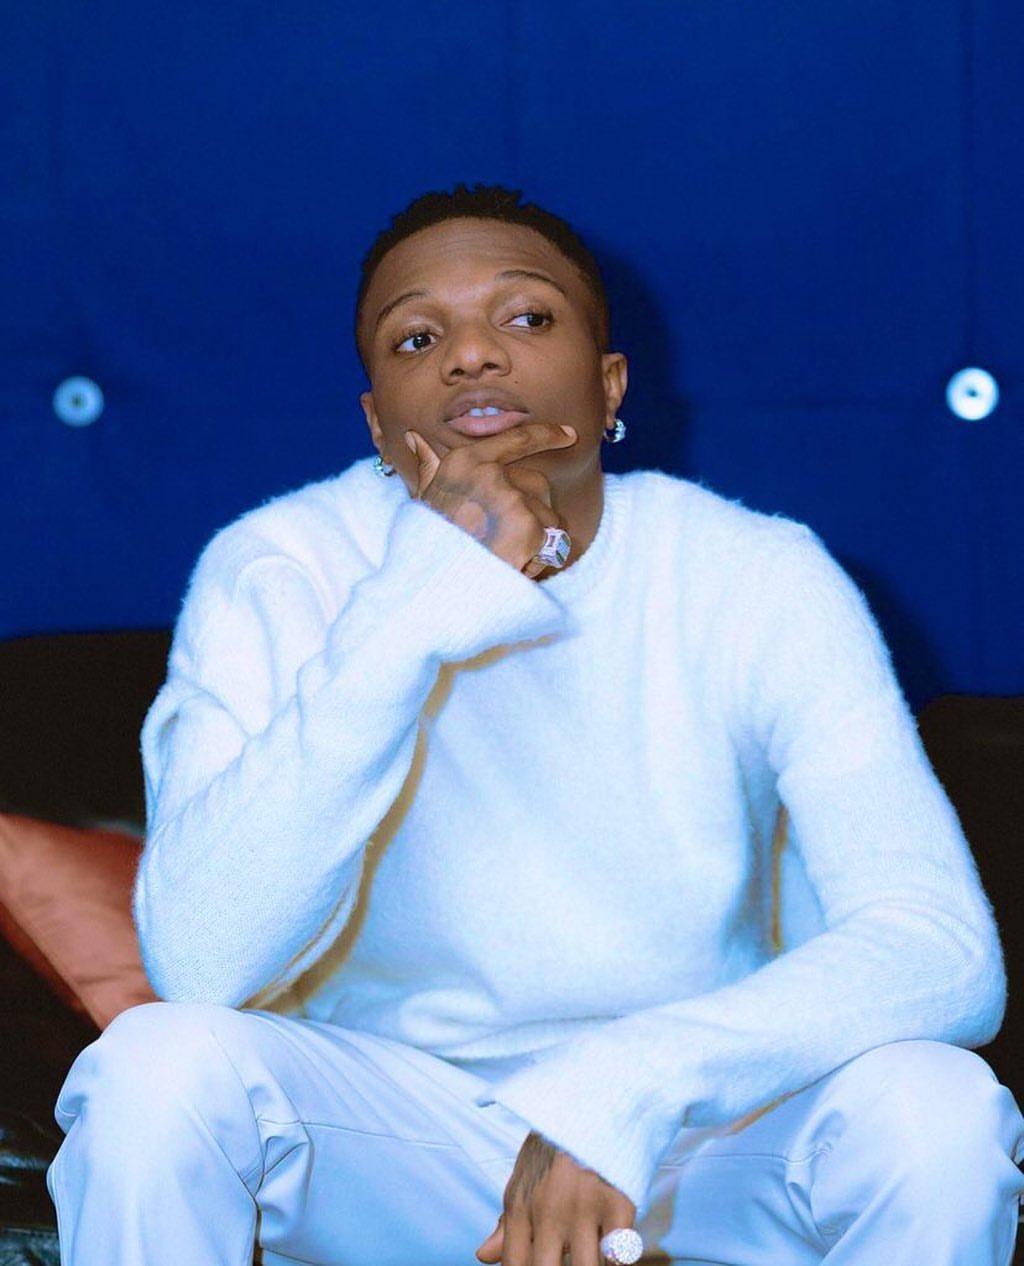 Star boy Wizkid teases fans with an upcoming new album (Photo)